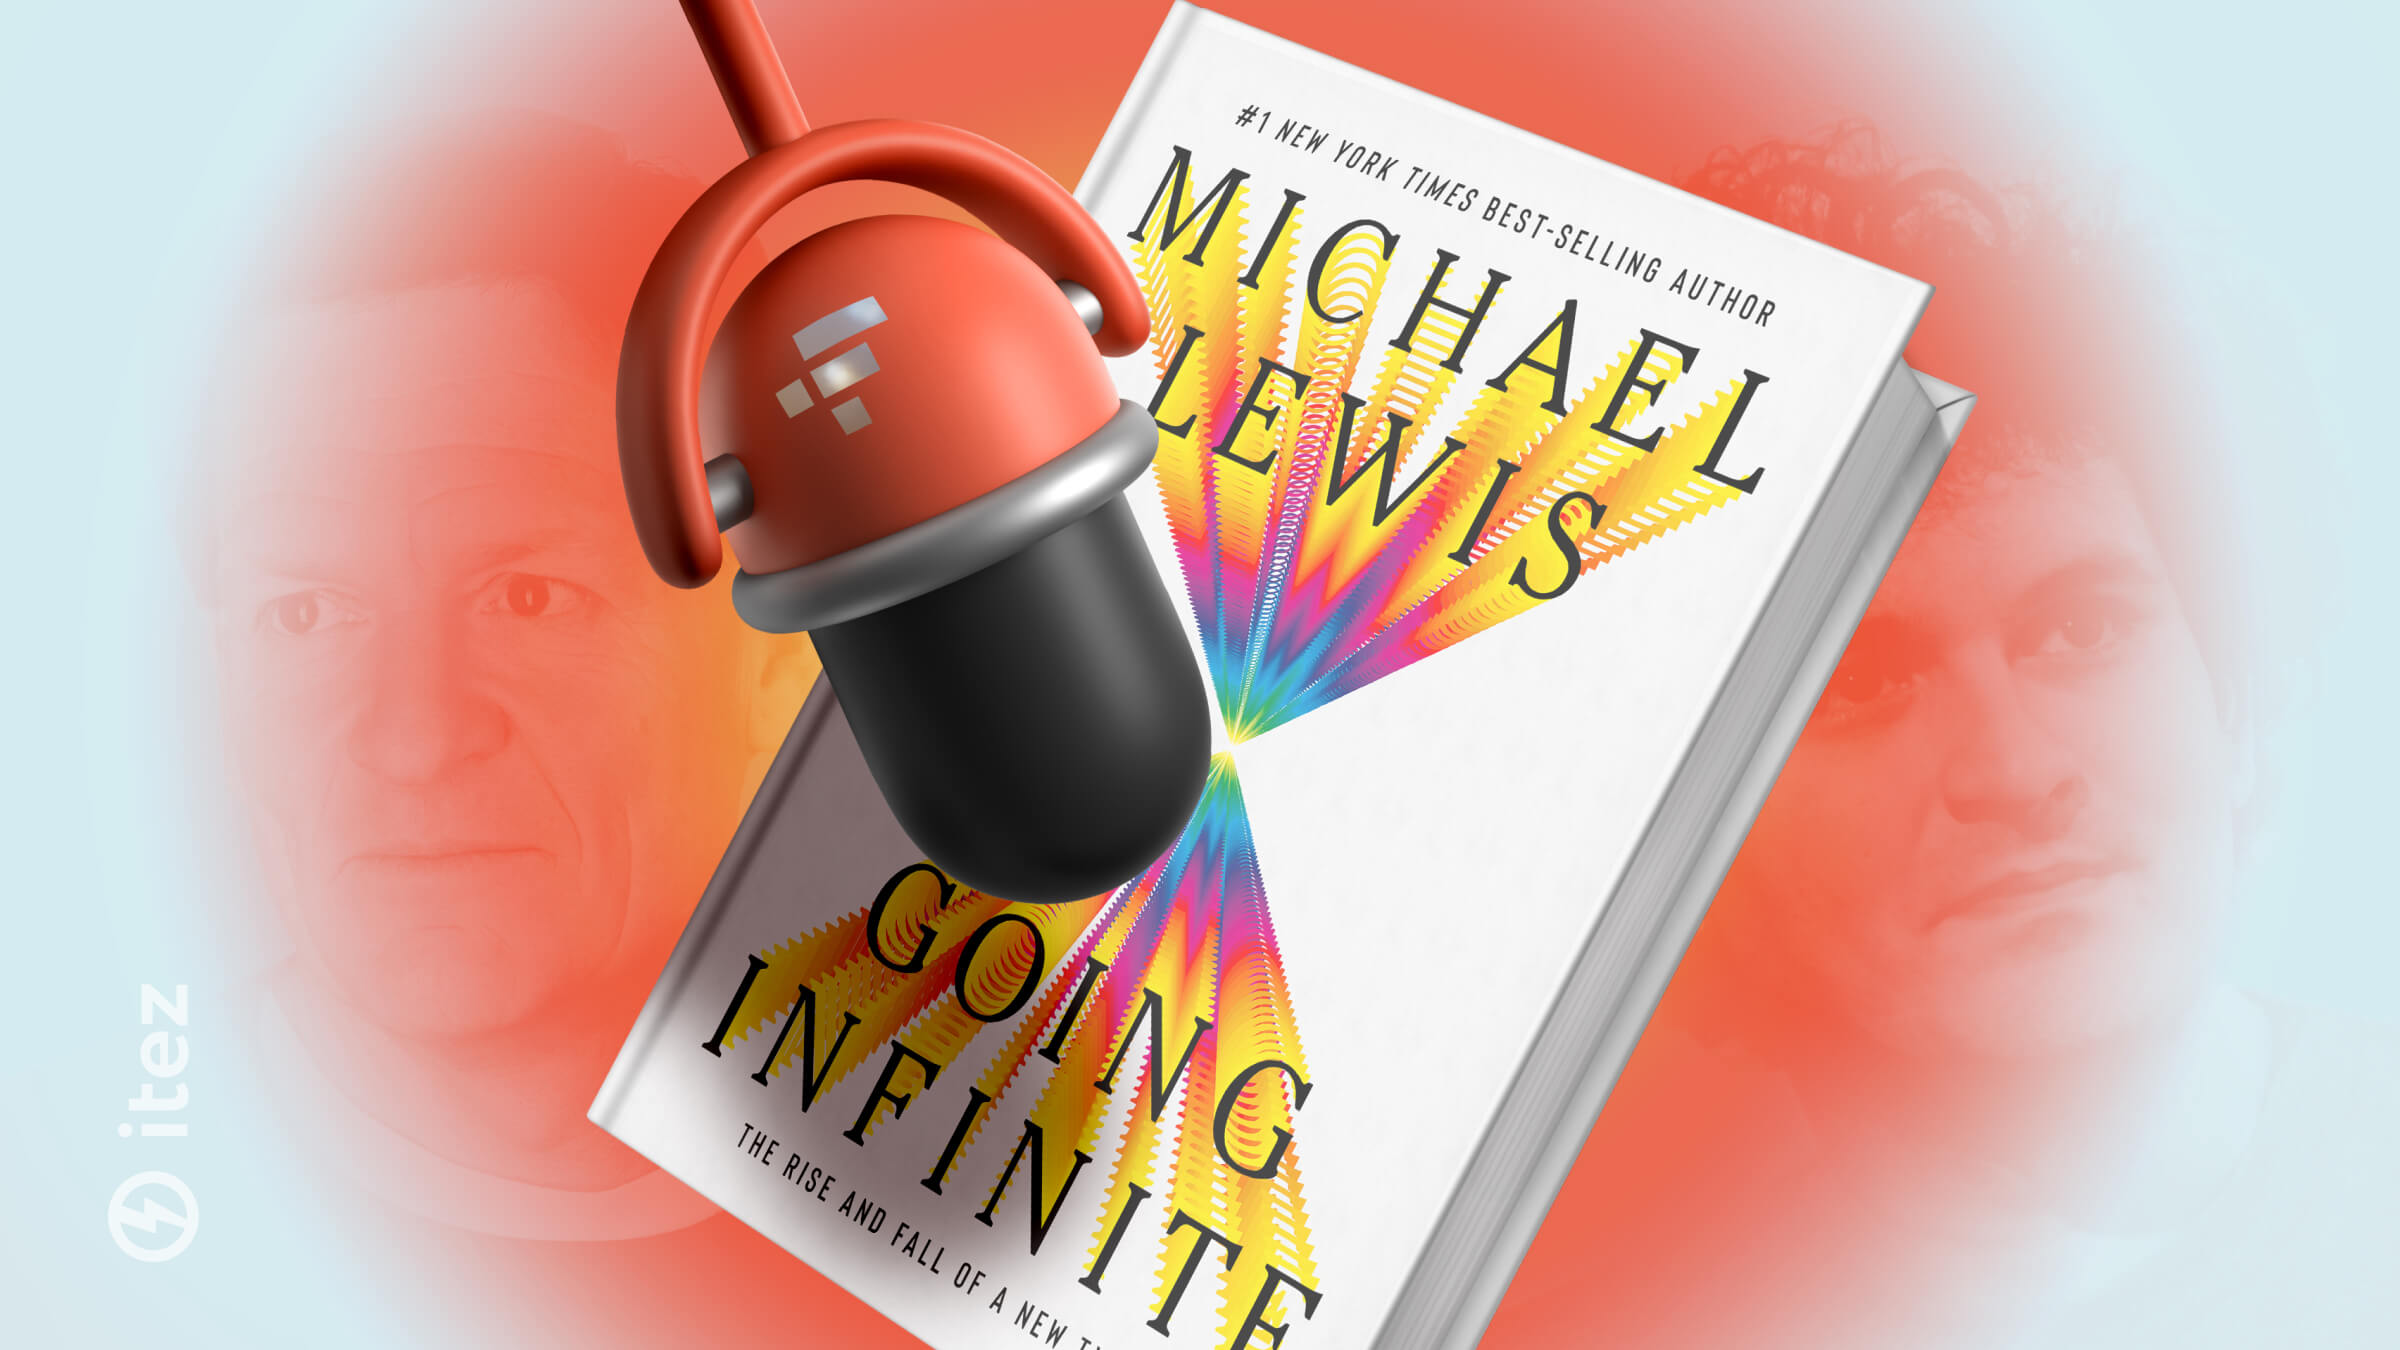 4 highlights about Sam Bankman-Fried from Michael Lewis’ “Going Infinite”